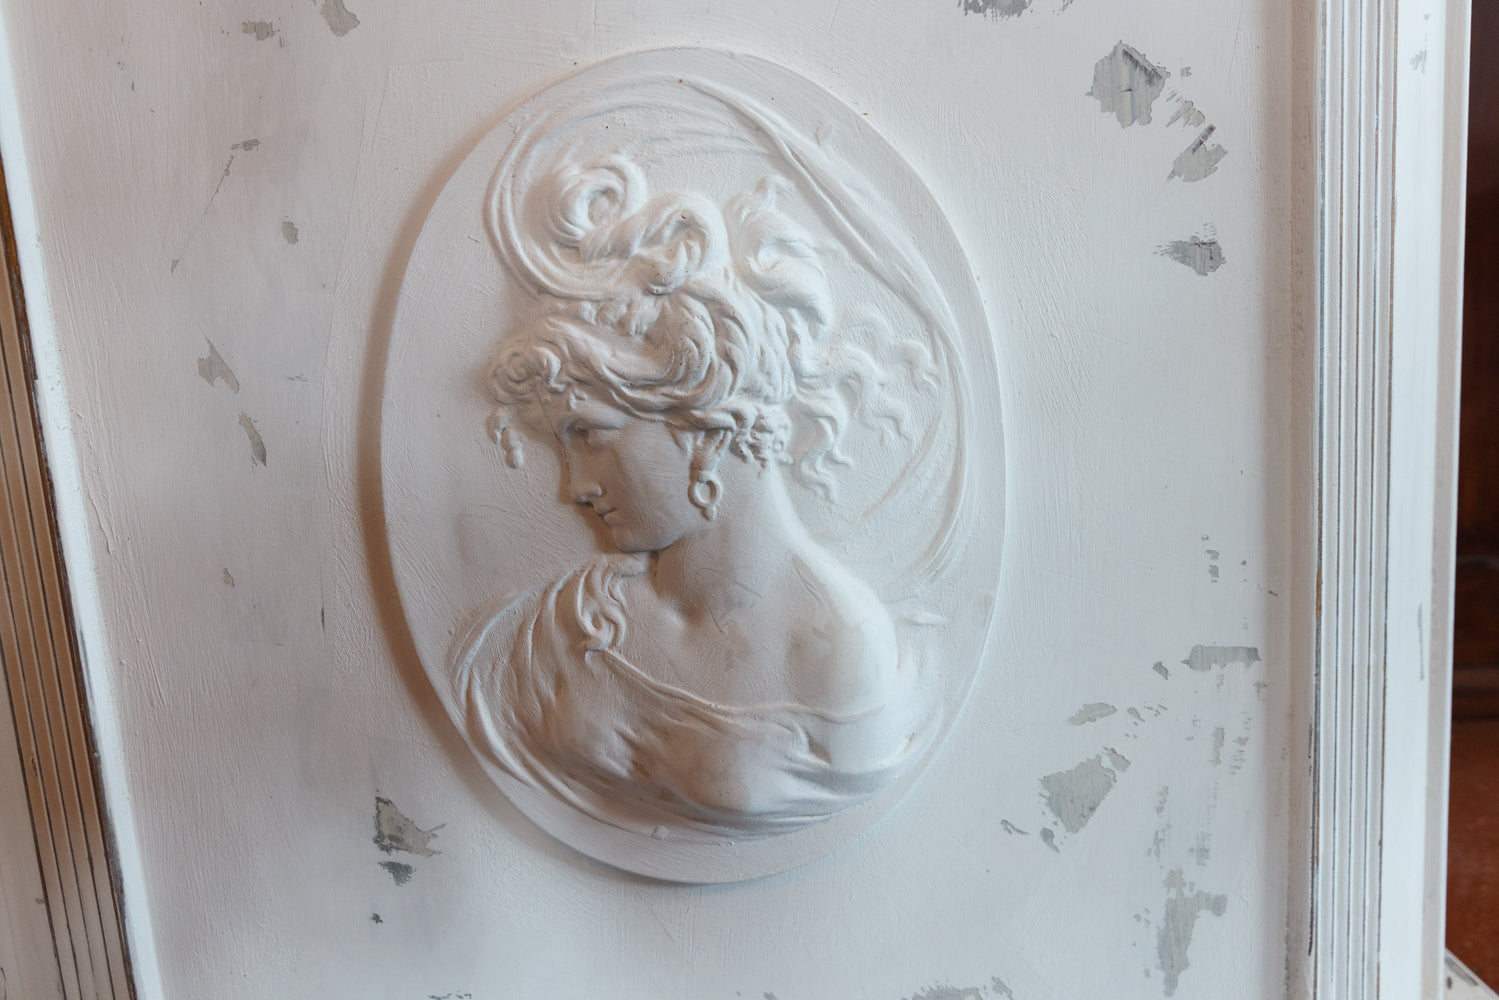 French 19th Century Wooden Cameo Plinths